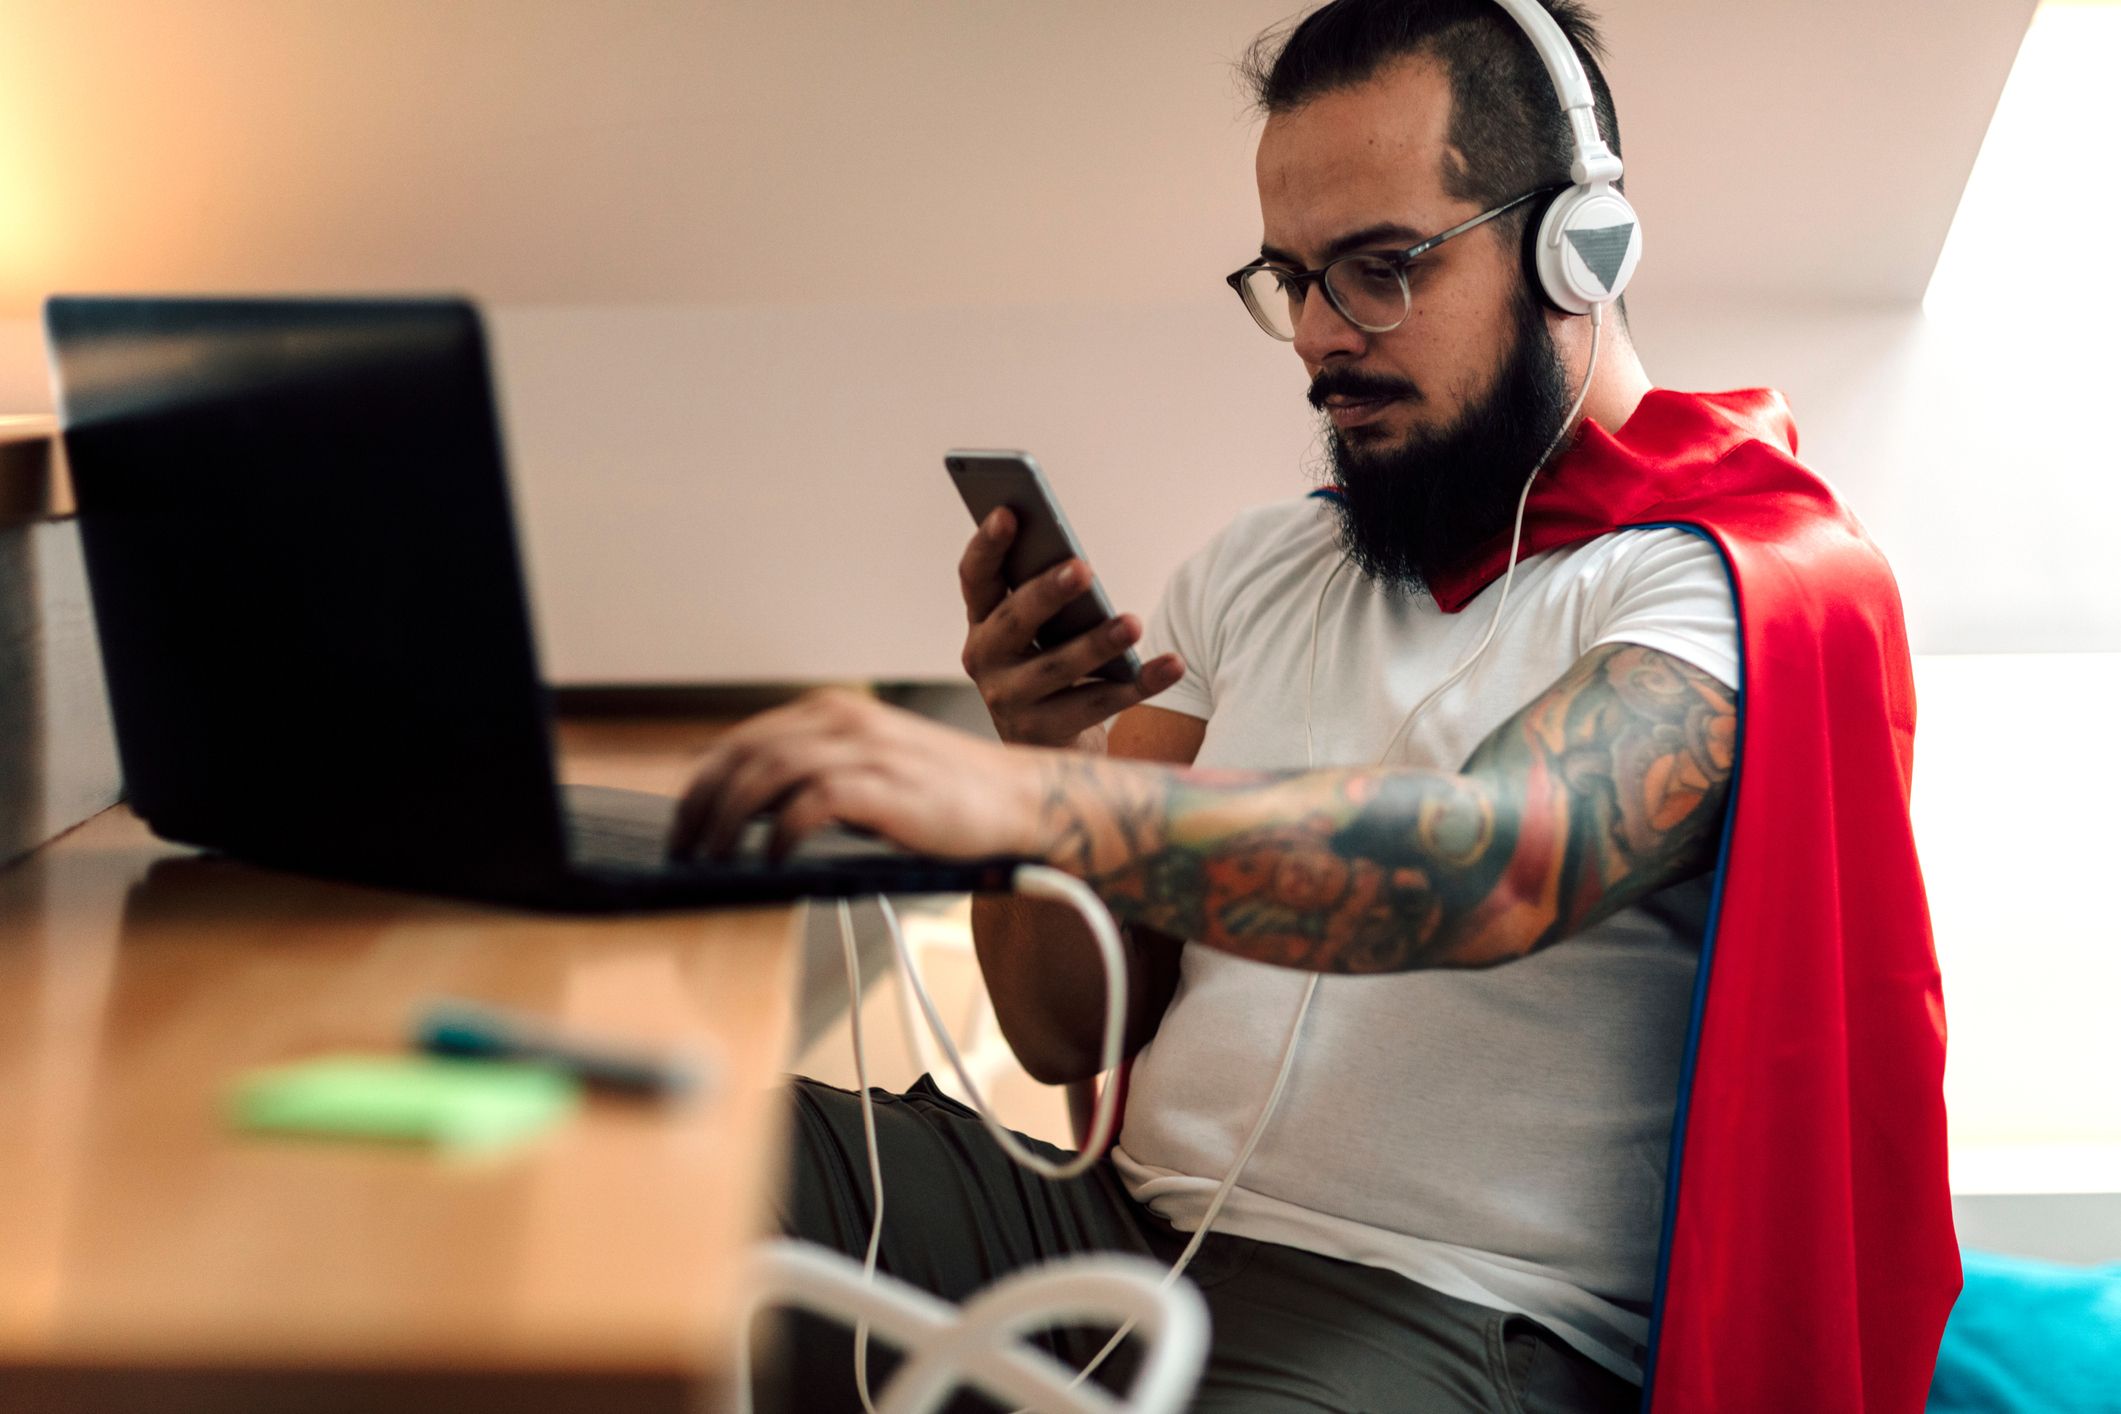 Release Your Inner Superhero to Update Your WiFi Name and Password